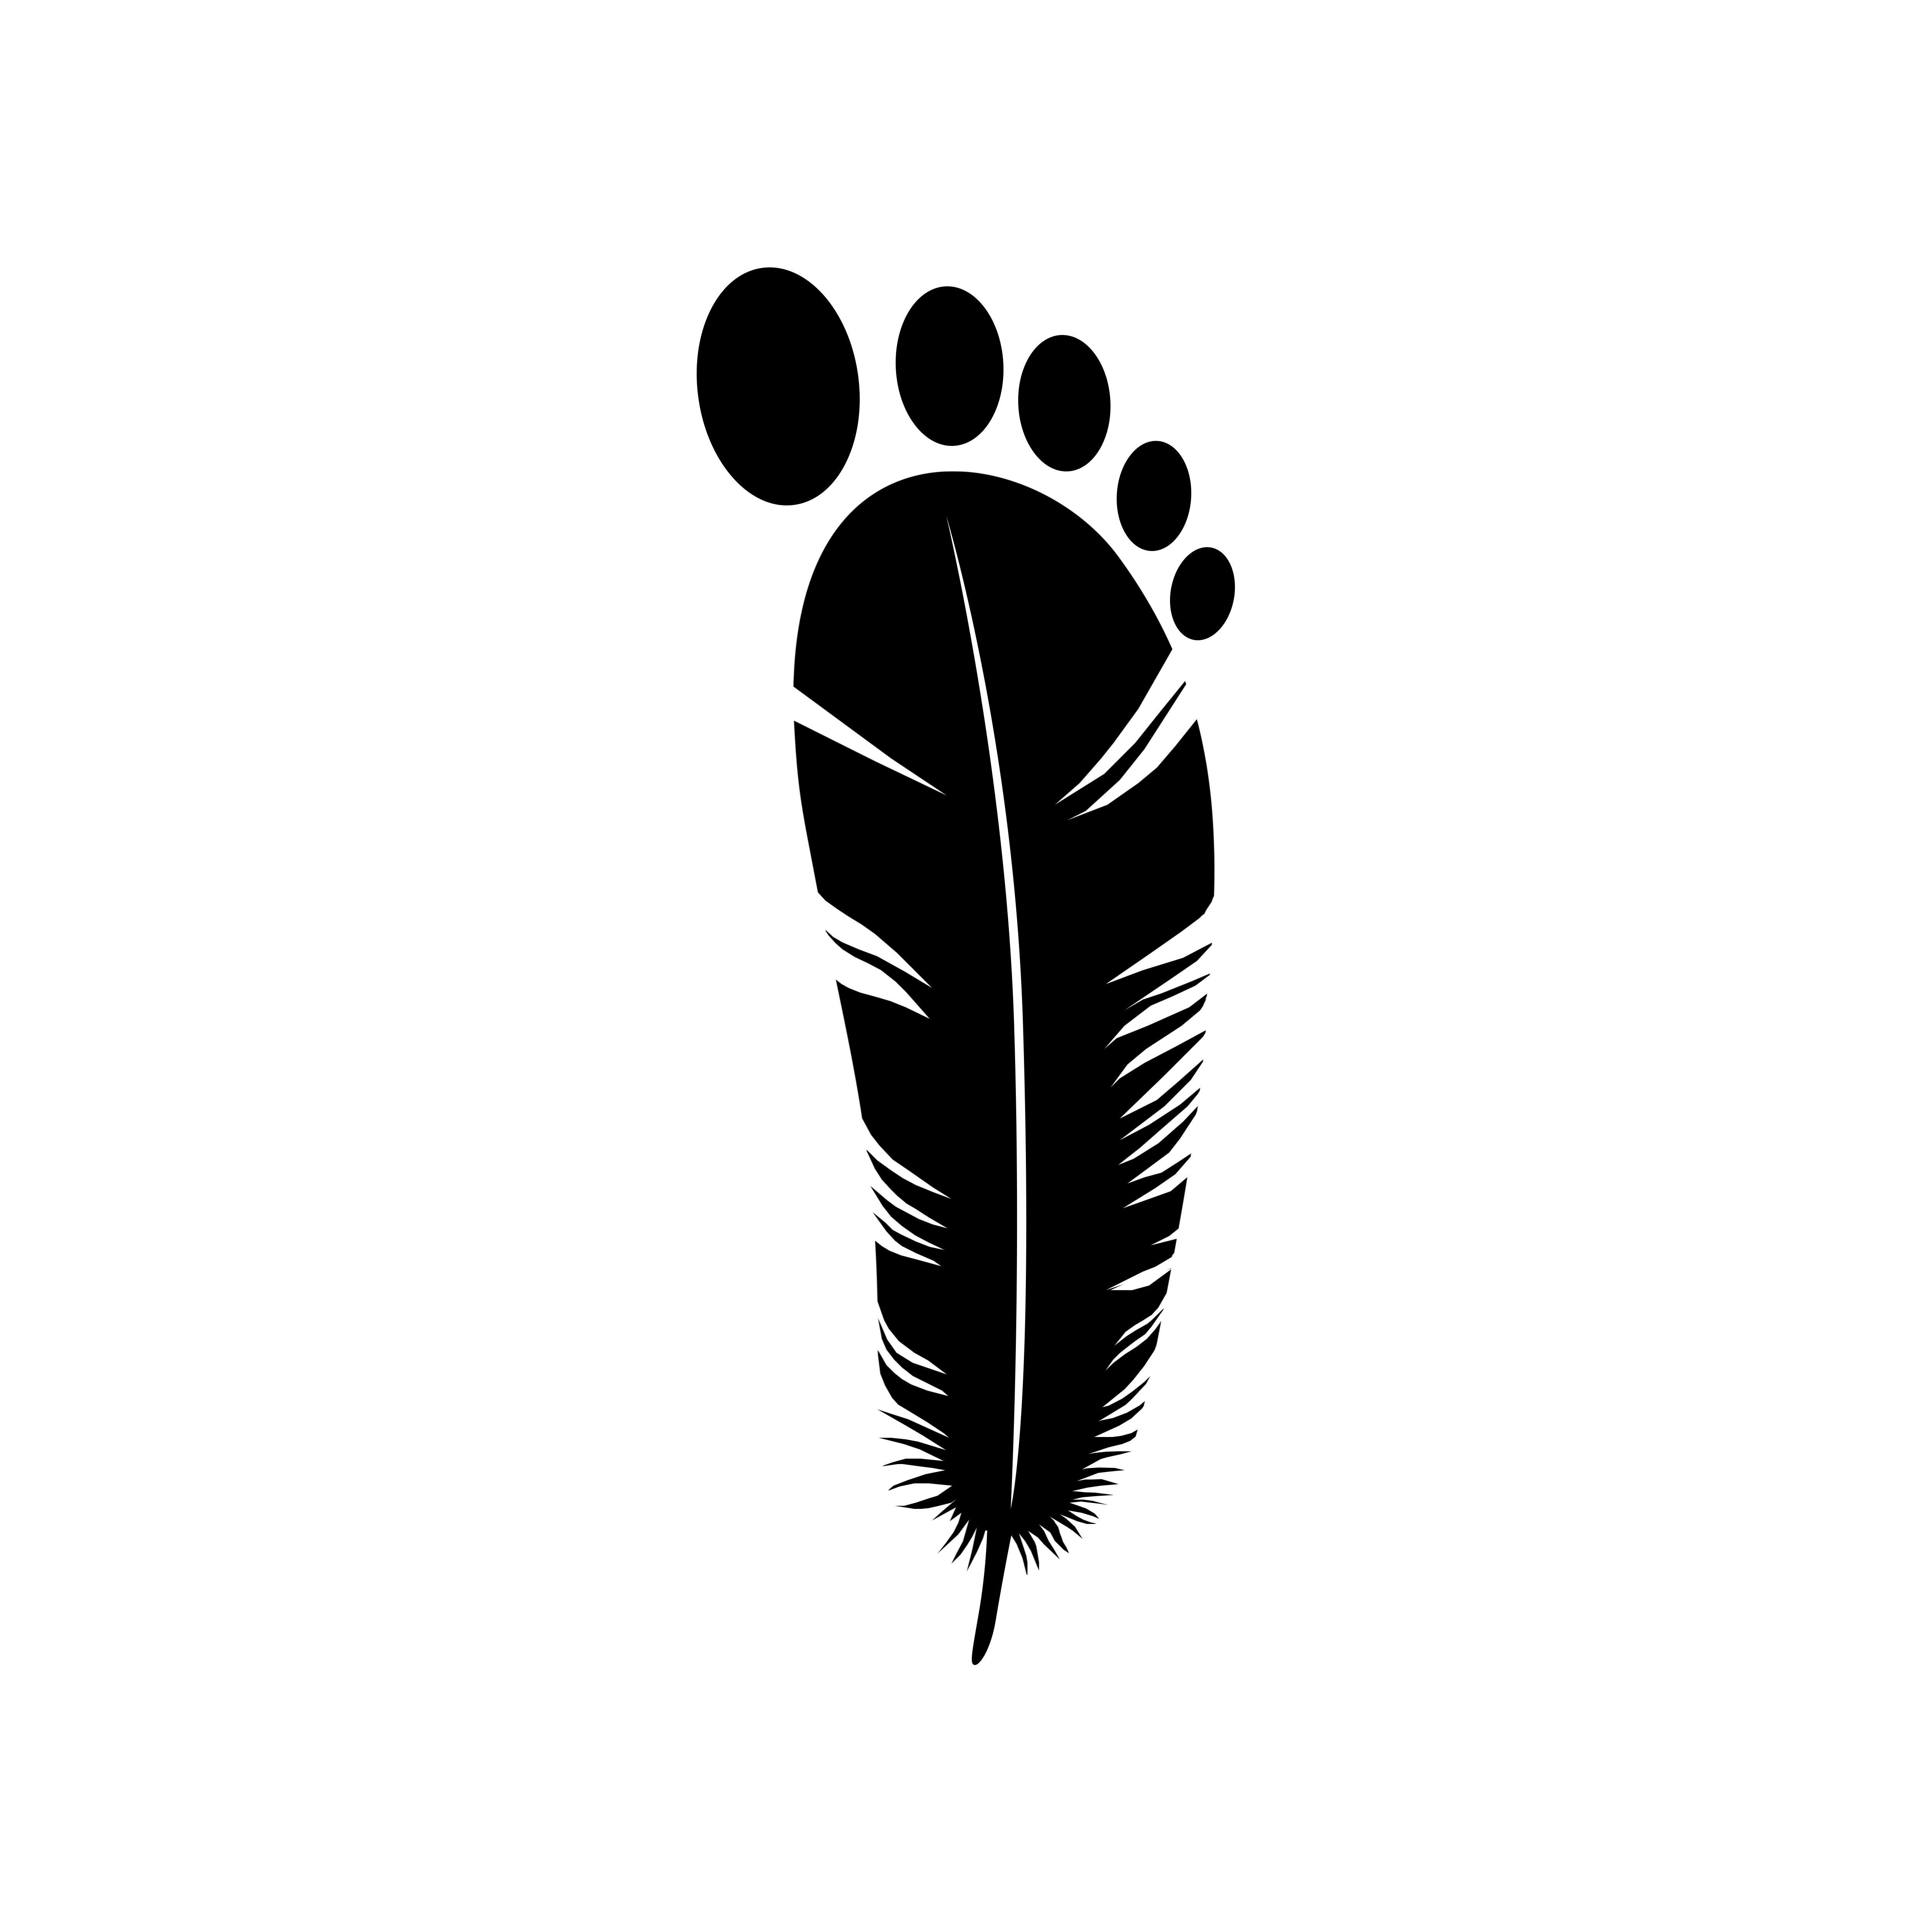 Foot and White with Wing Logo - Instagram @iamsufa Light foot logo design | logo graphic design ...